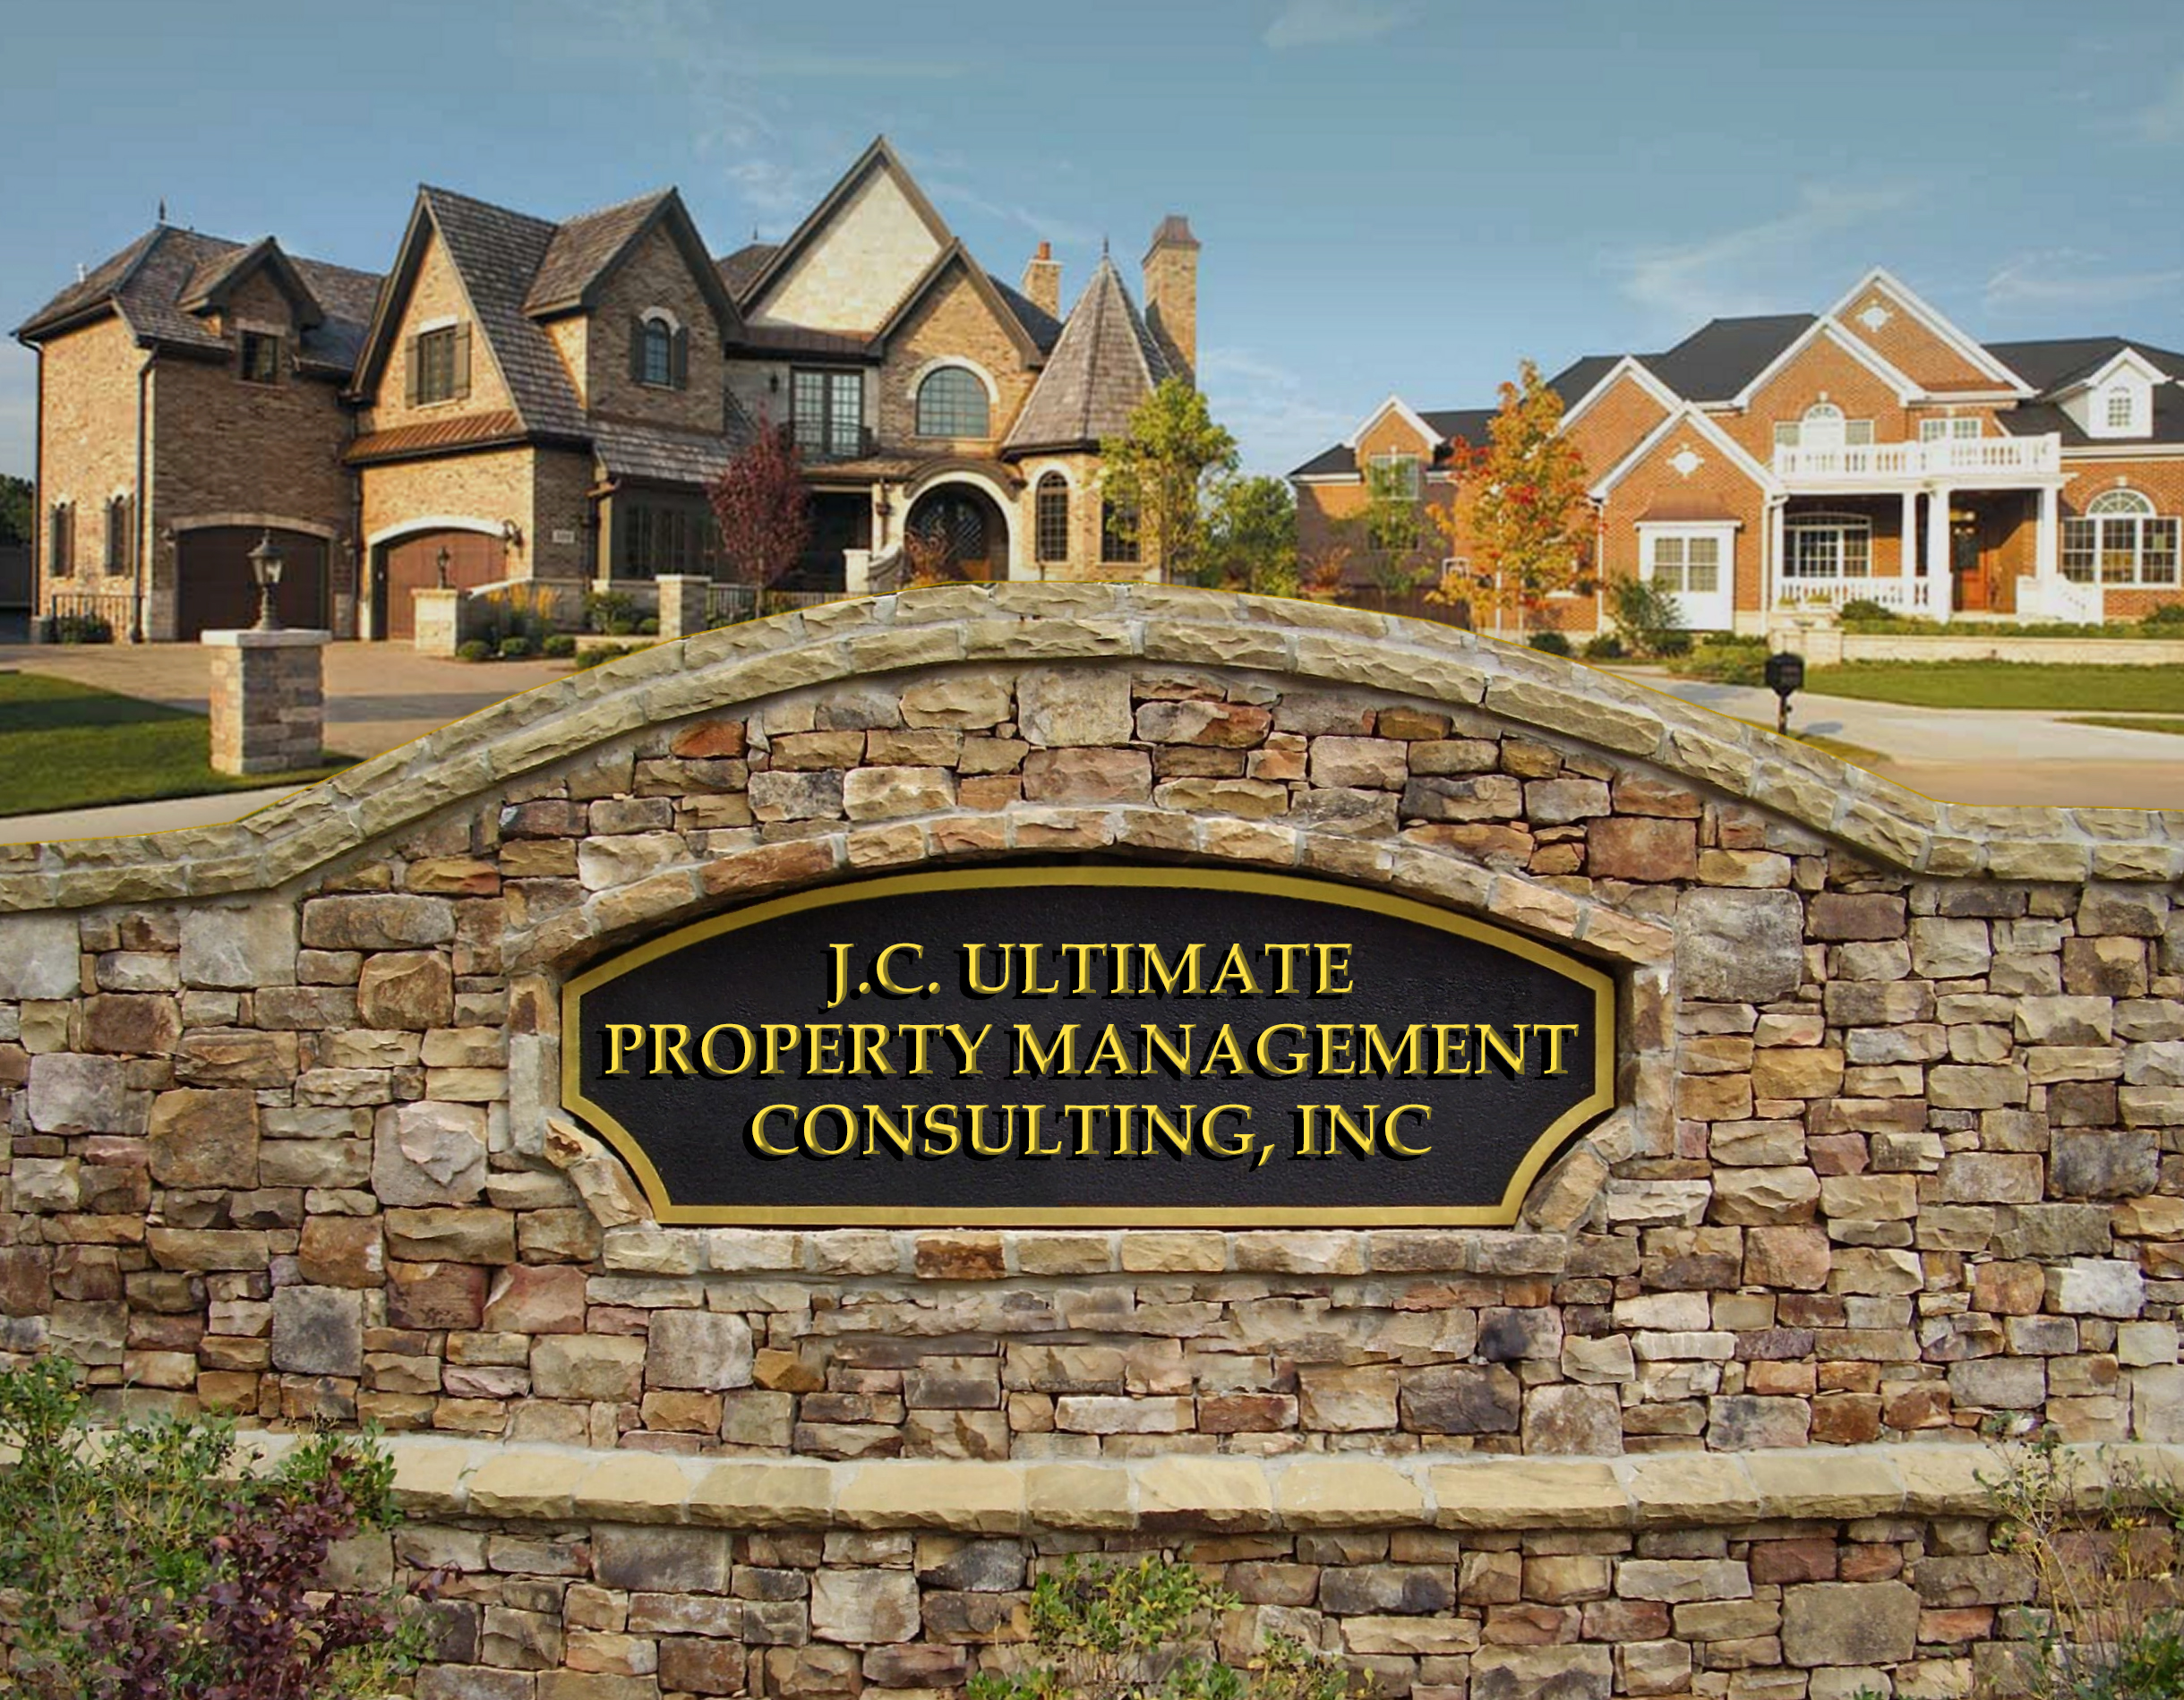 JC Ultimate Property Management Consulting, Inc.